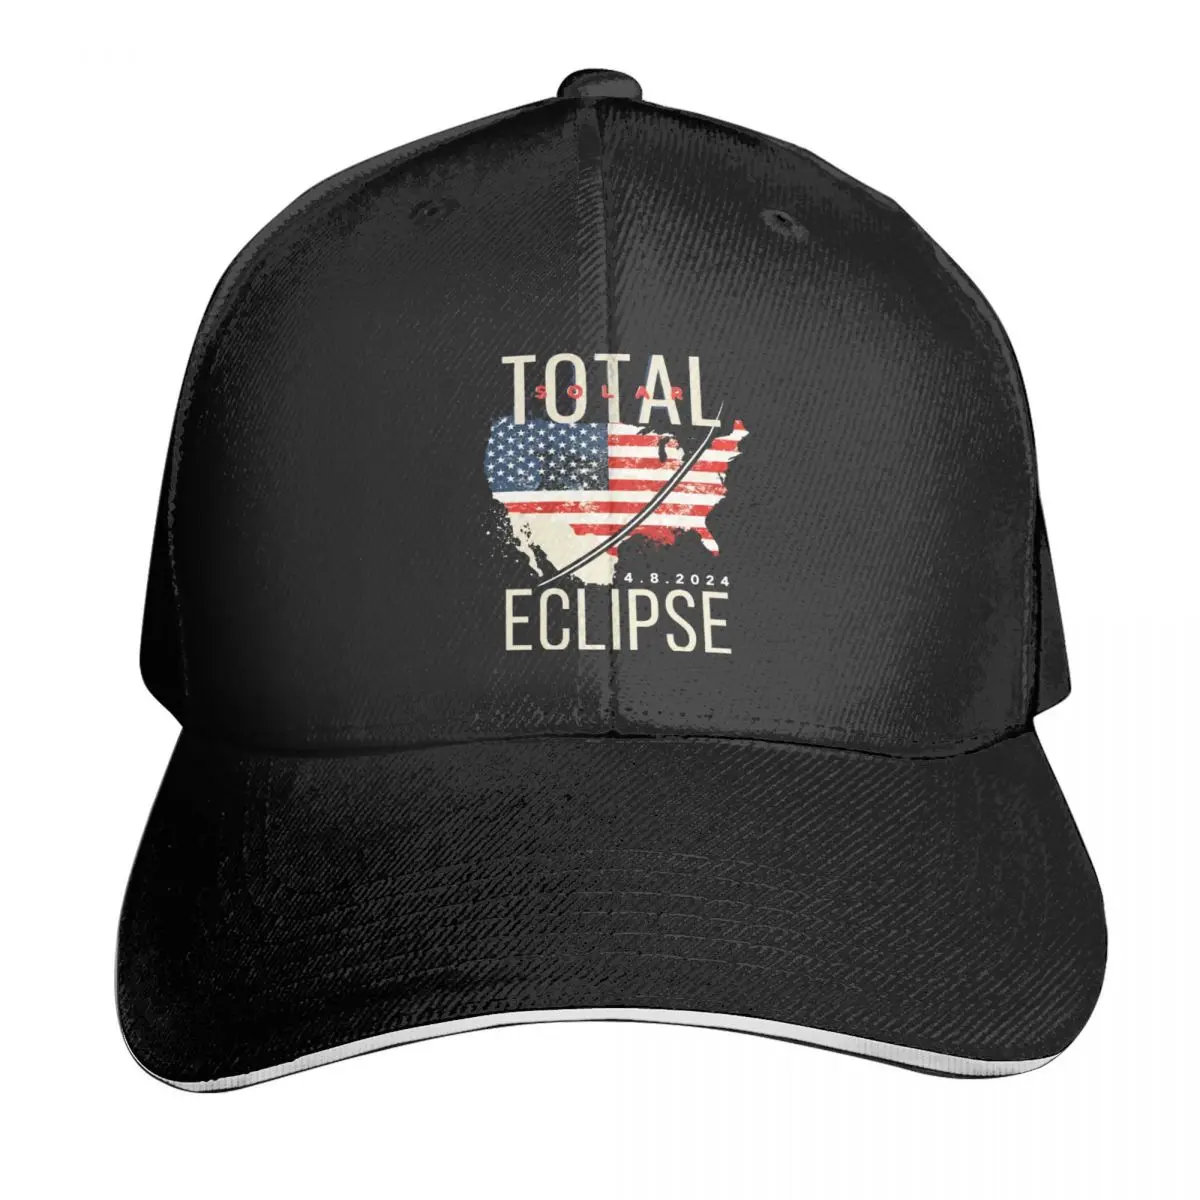 

Total Solar Eclipse 4.8.2024 USA Casquette, Polyester Cap Customizable Moisture Wicking Nice Gift